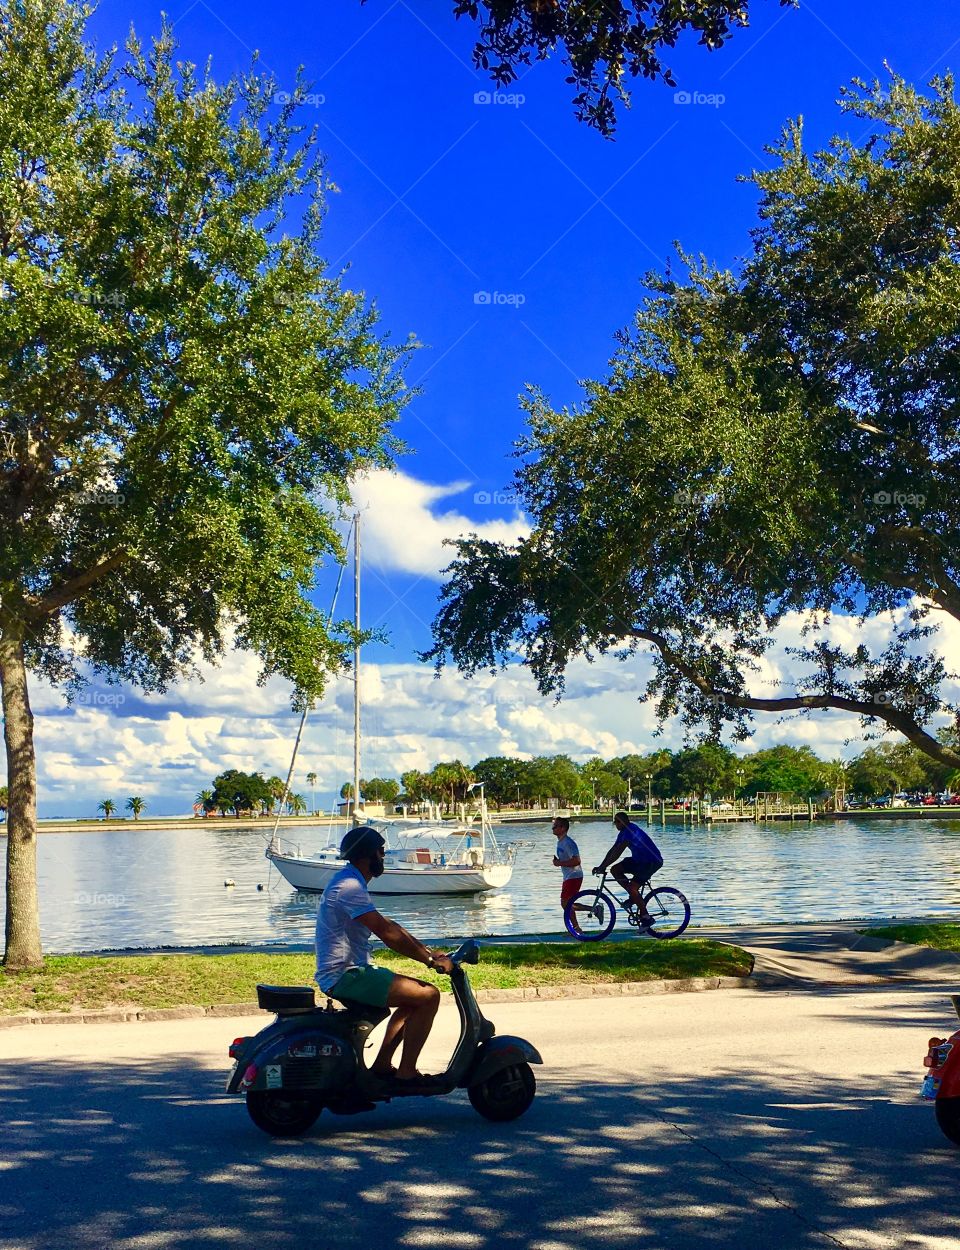 Vespa rider, jogger and Bicycler enjoying the day in St Petersburg FL